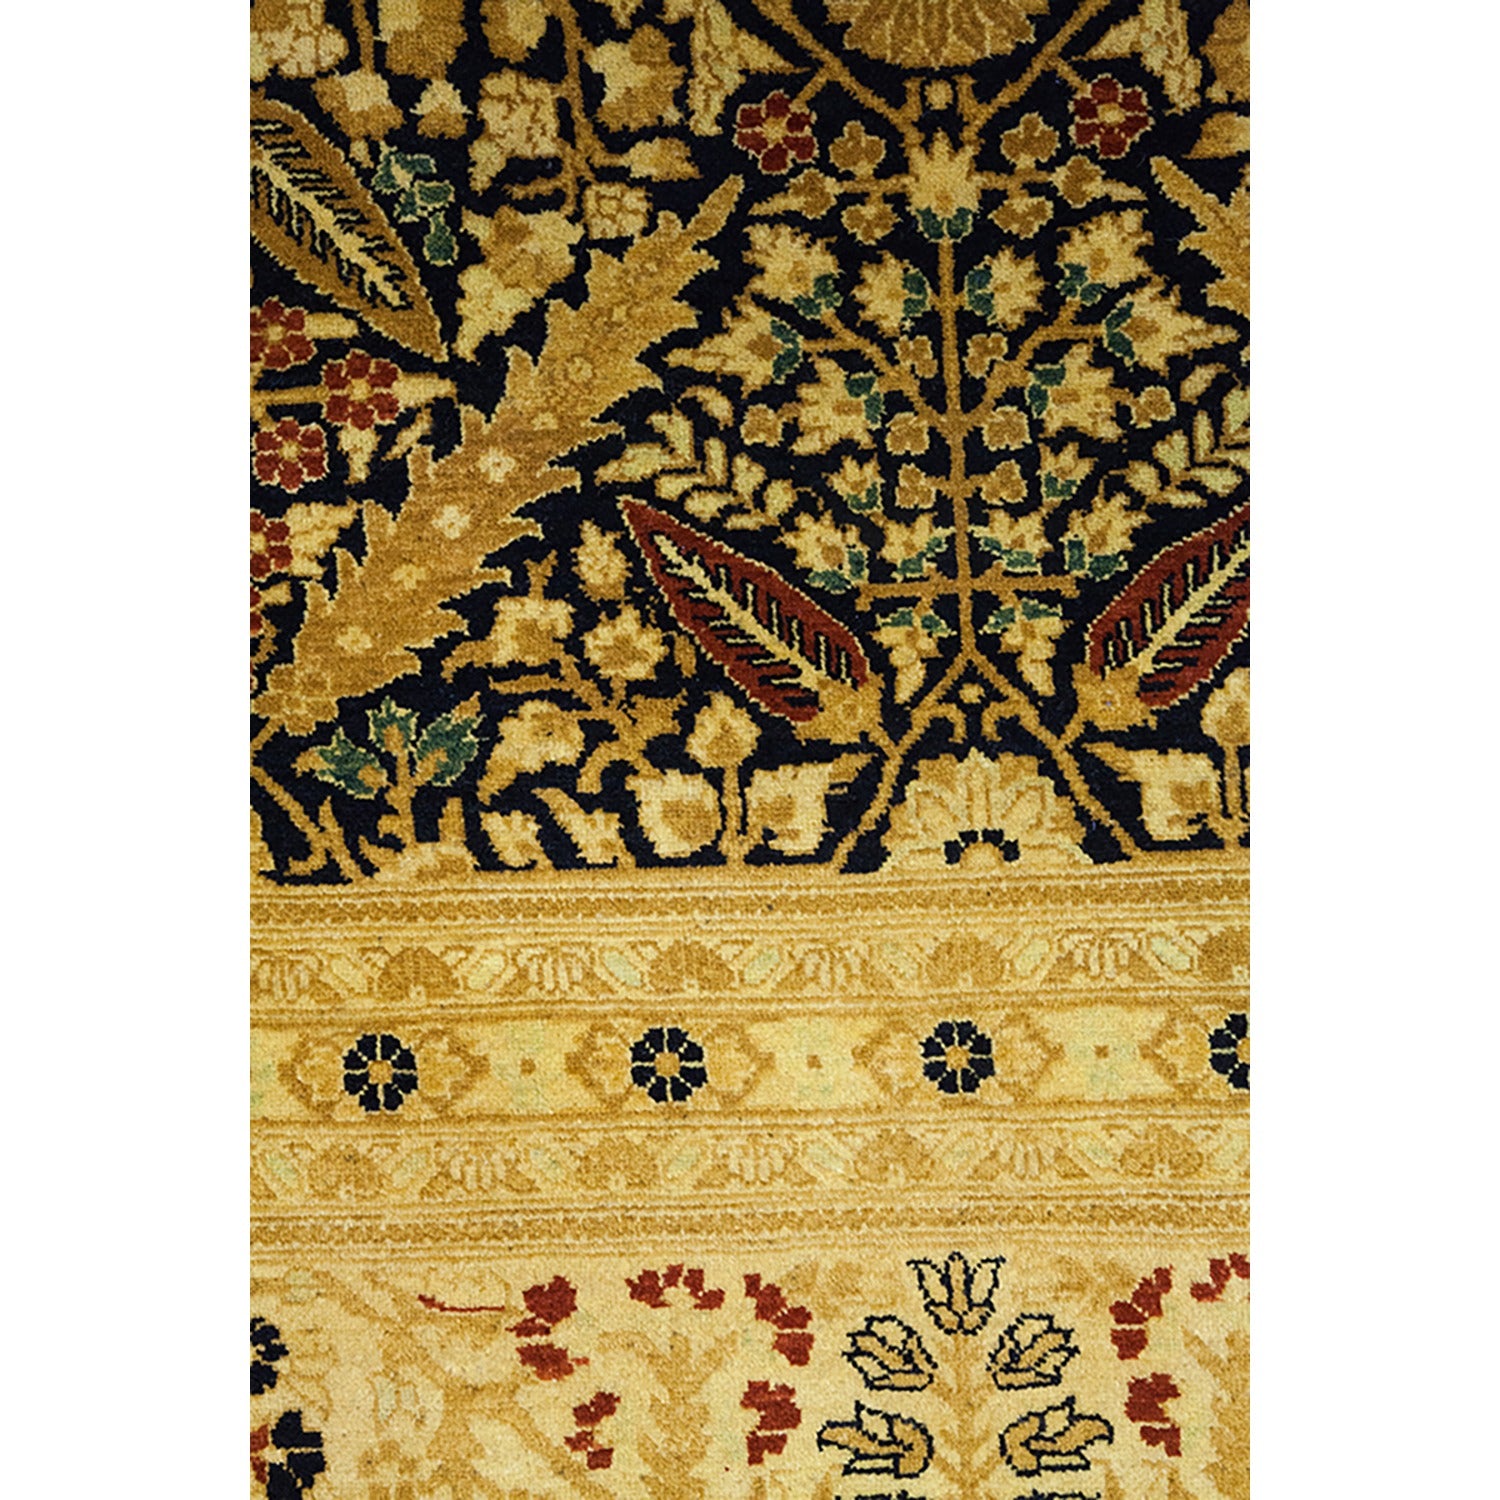 Richly patterned handwoven carpet with intricate floral and foliate motifs.